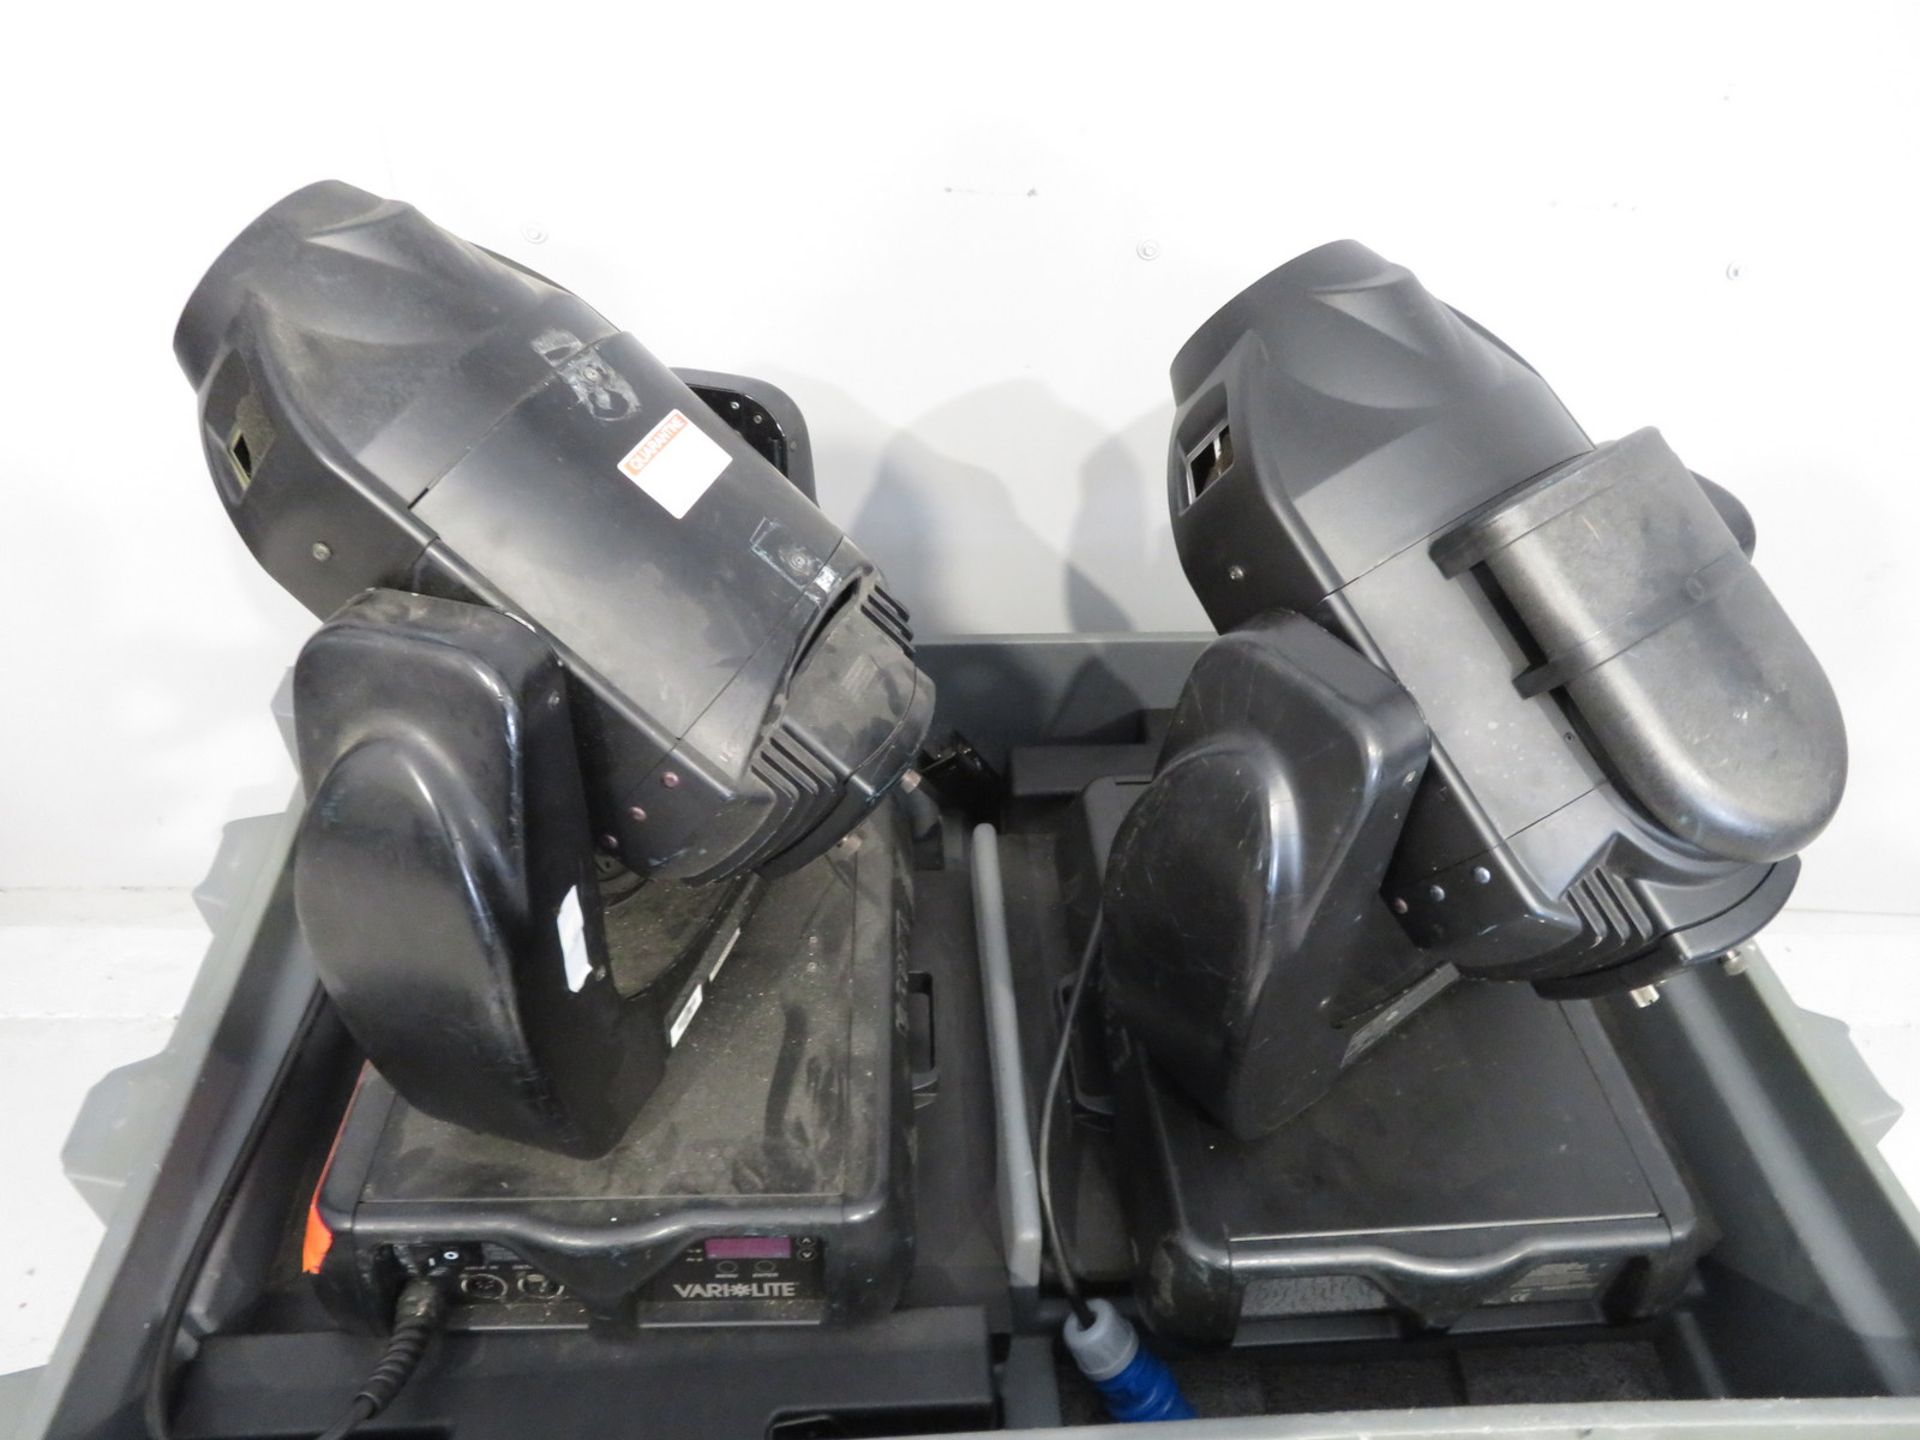 Pair of Varilite VL2402 Wash in flightcase. Includes hanging clamps and safety bonds. 1 Wo - Image 4 of 10